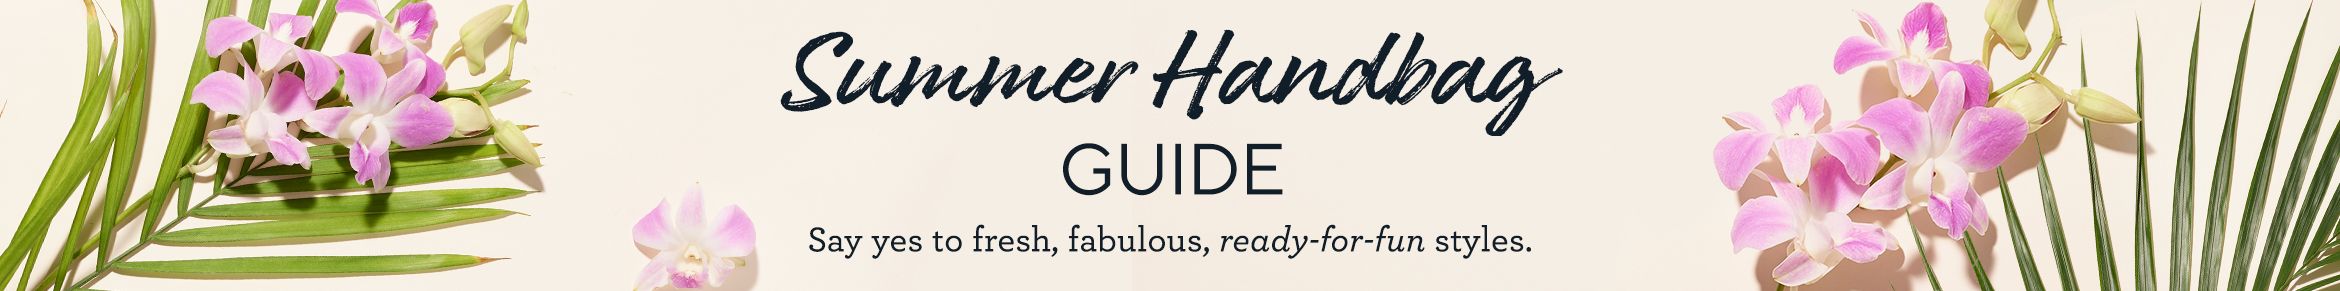 Summer Handbag Guide. Say yes to fresh, fabulous, ready-for-fun styles. 